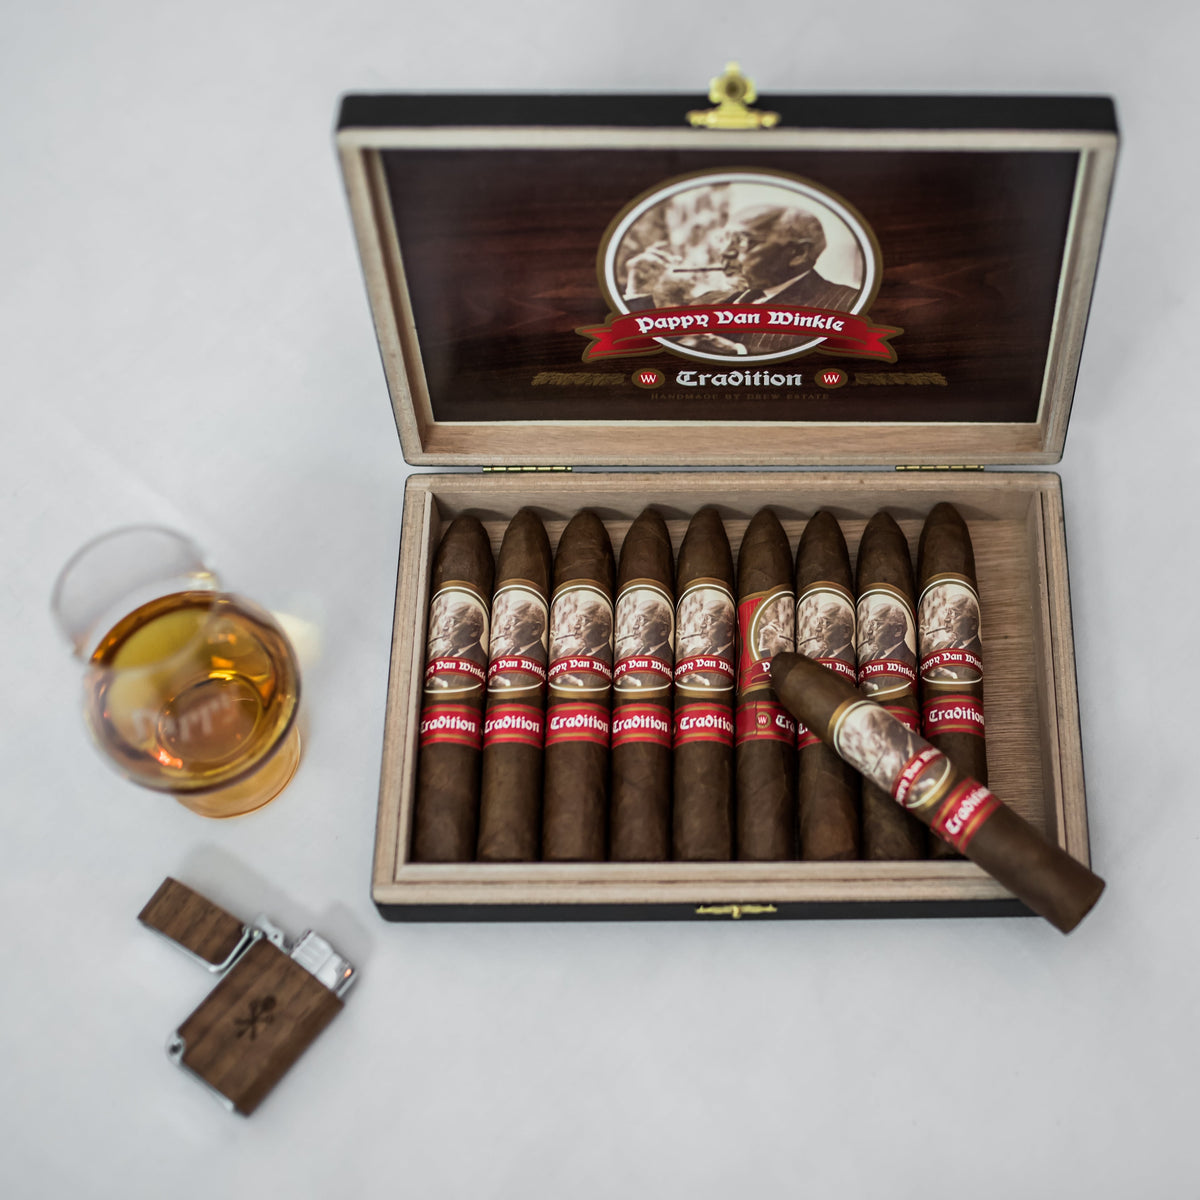 Pappy Van Winkle Tradition Cigars: Belicoso (Box of 10)